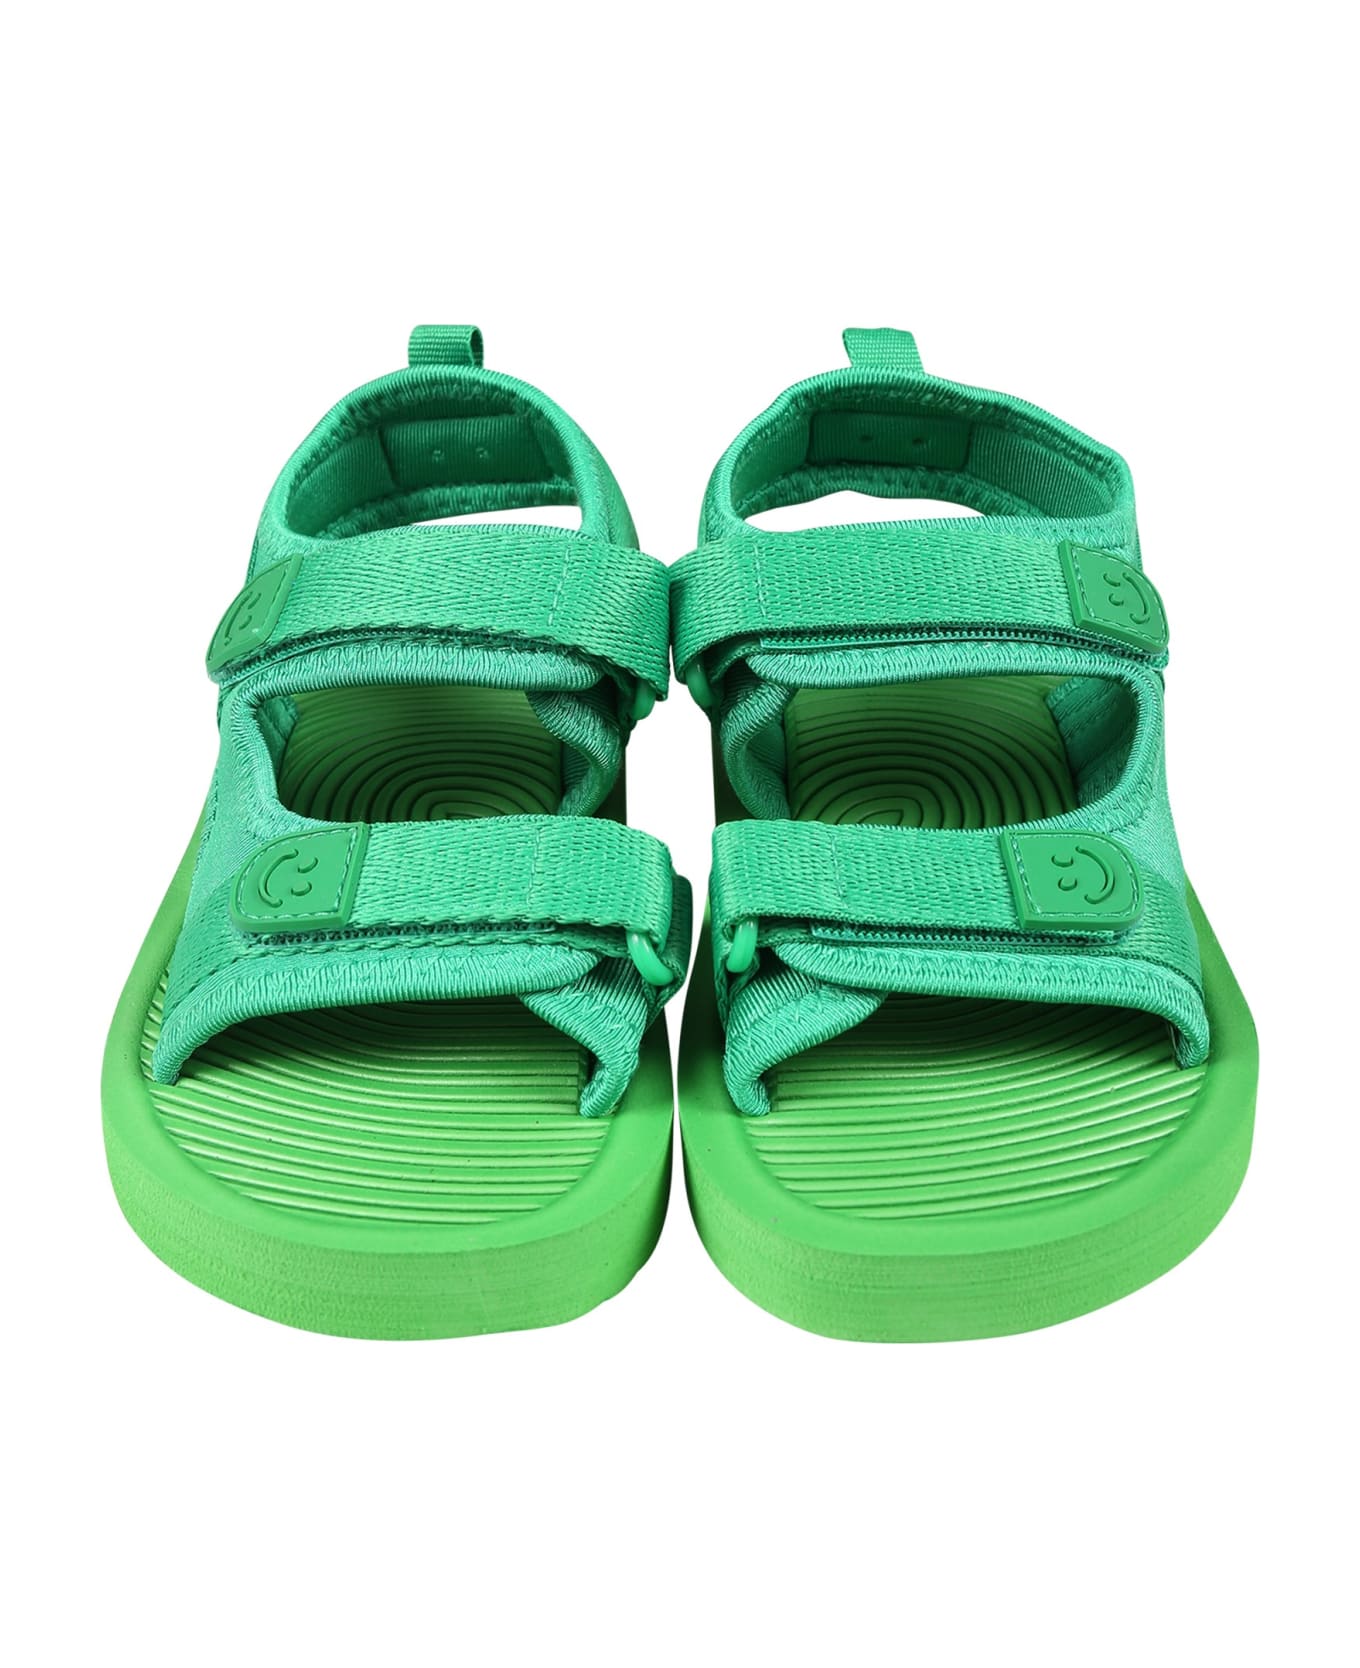 Molo Green Sandals For Kids With Logo - Green シューズ